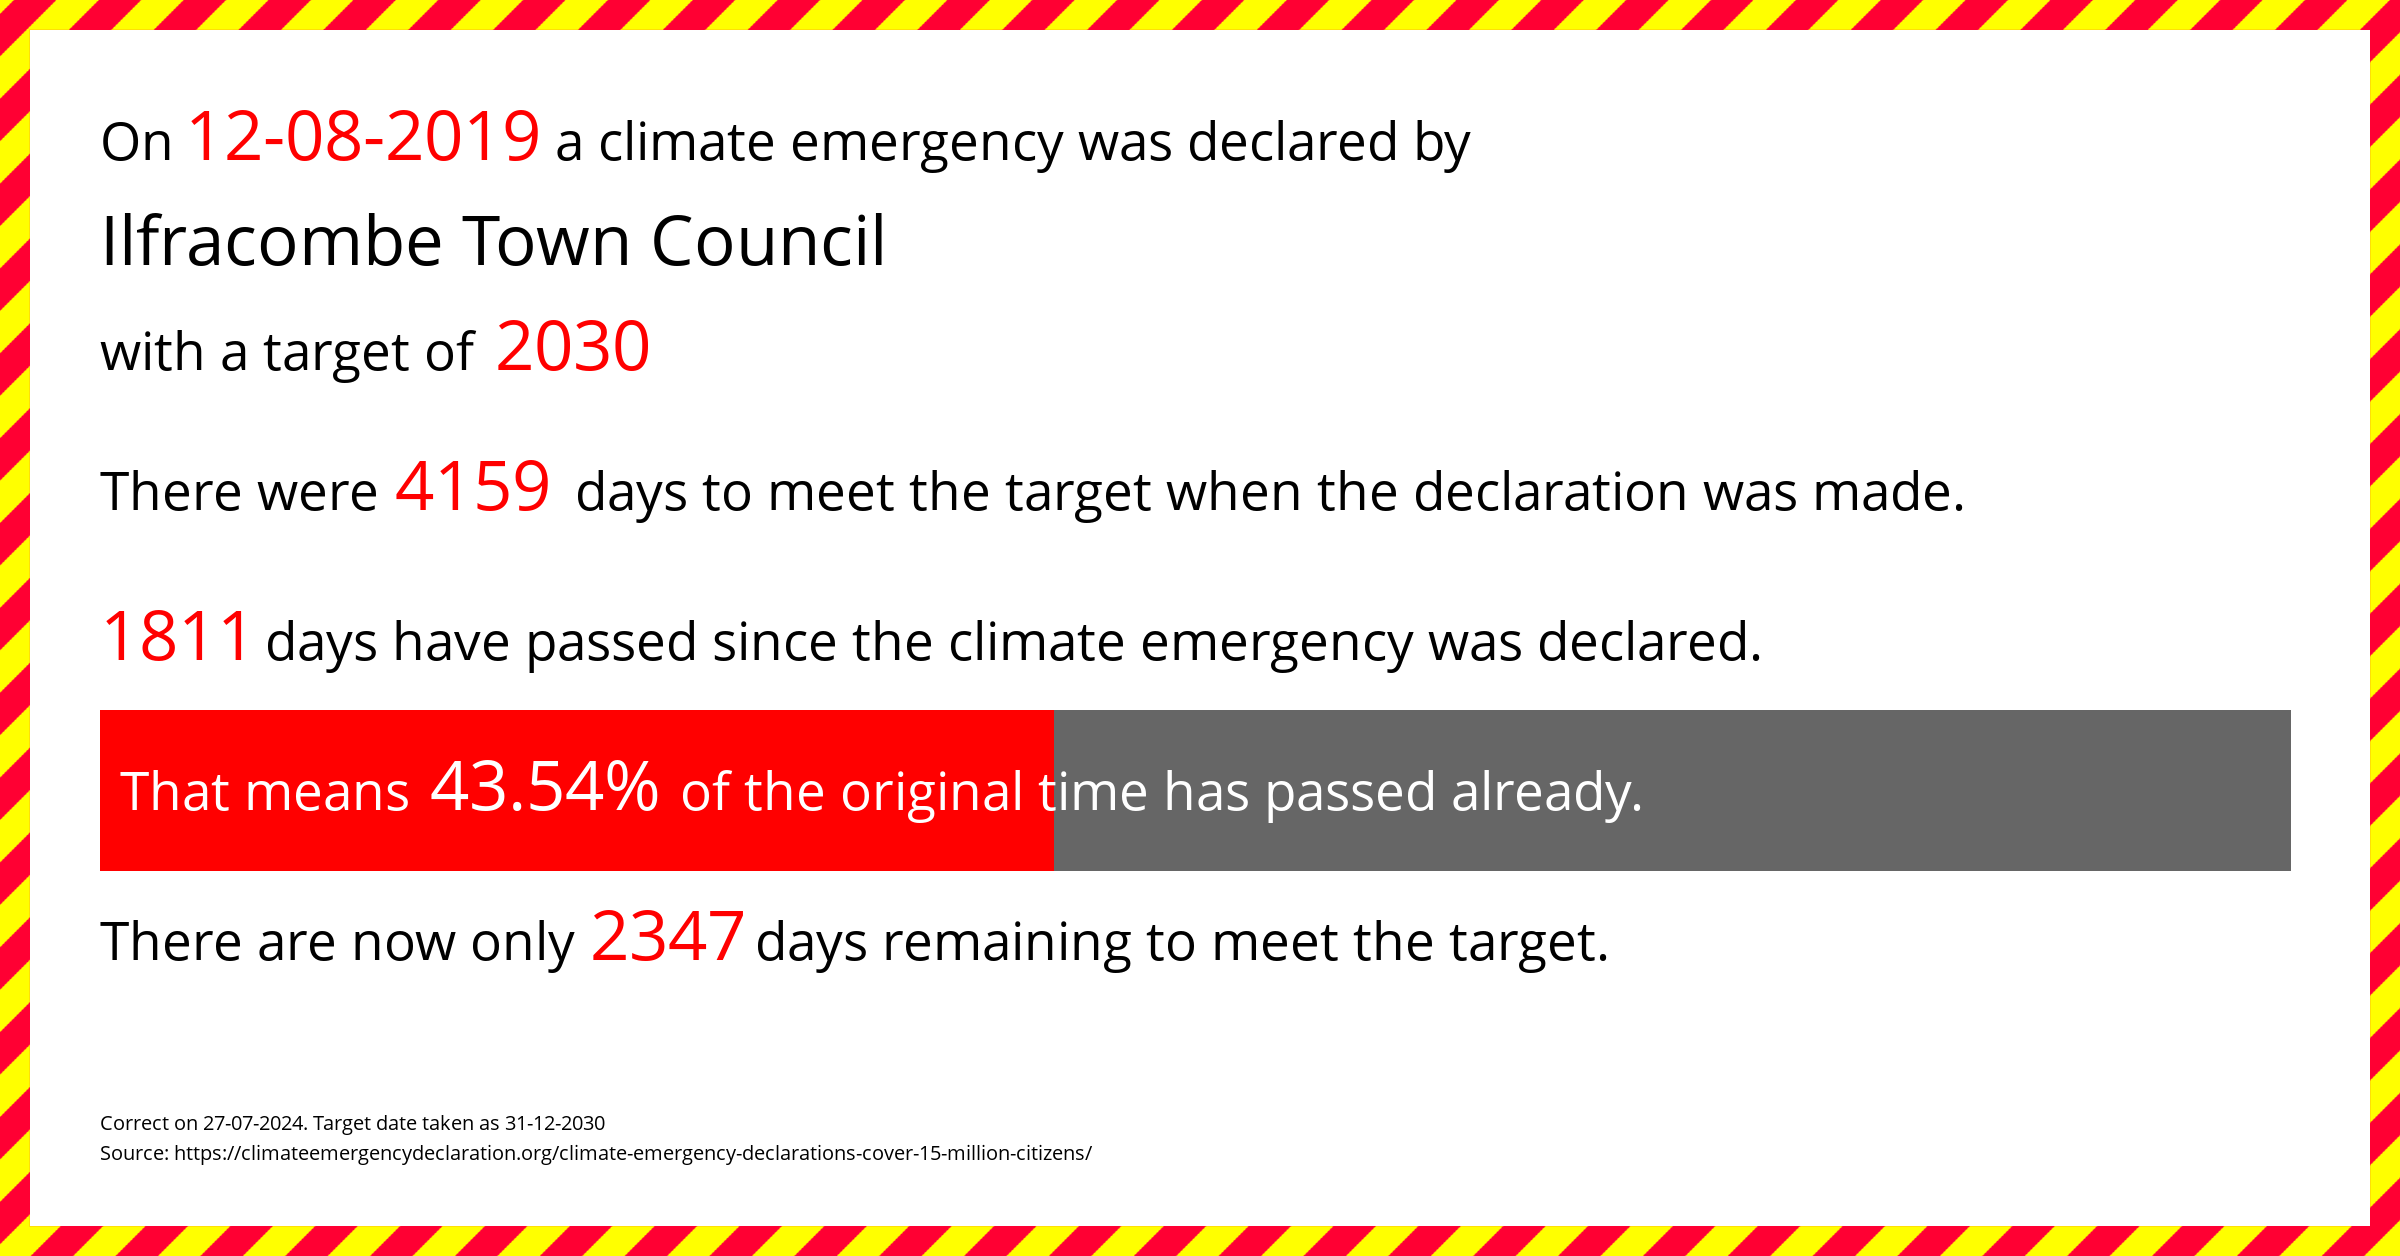 Ilfracombe Town Council declared a Climate emergency on Monday 12th August 2019, with a target of 2030.